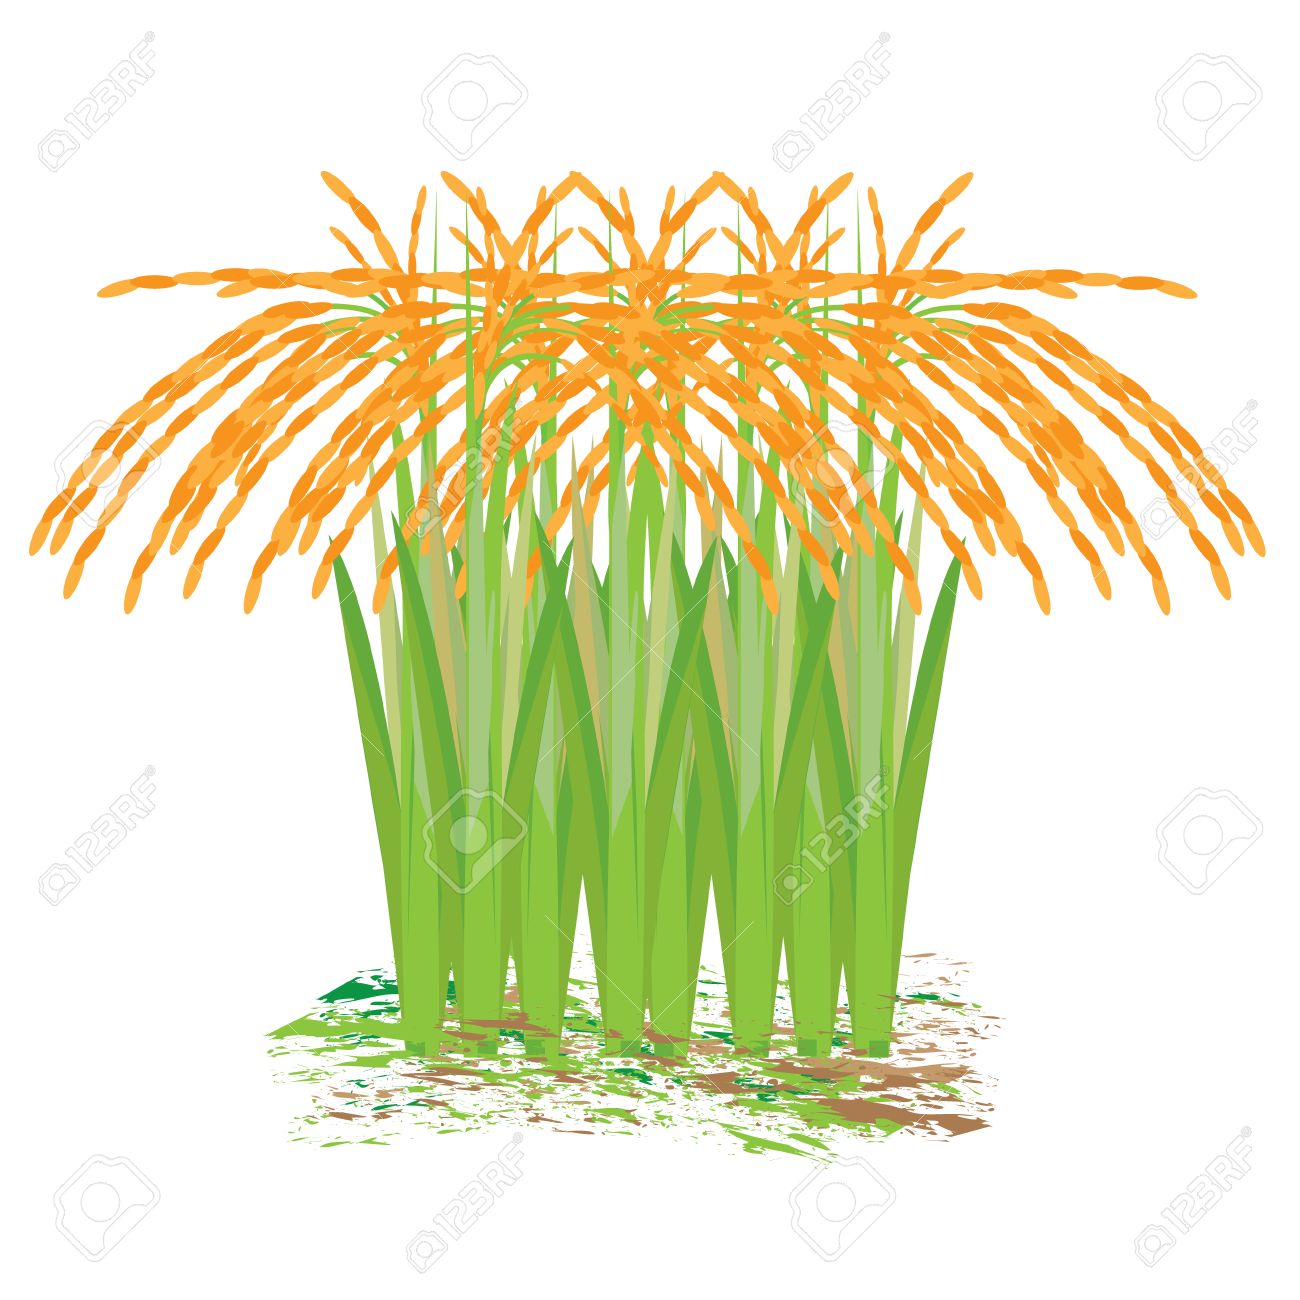 Paddy crop clipart.